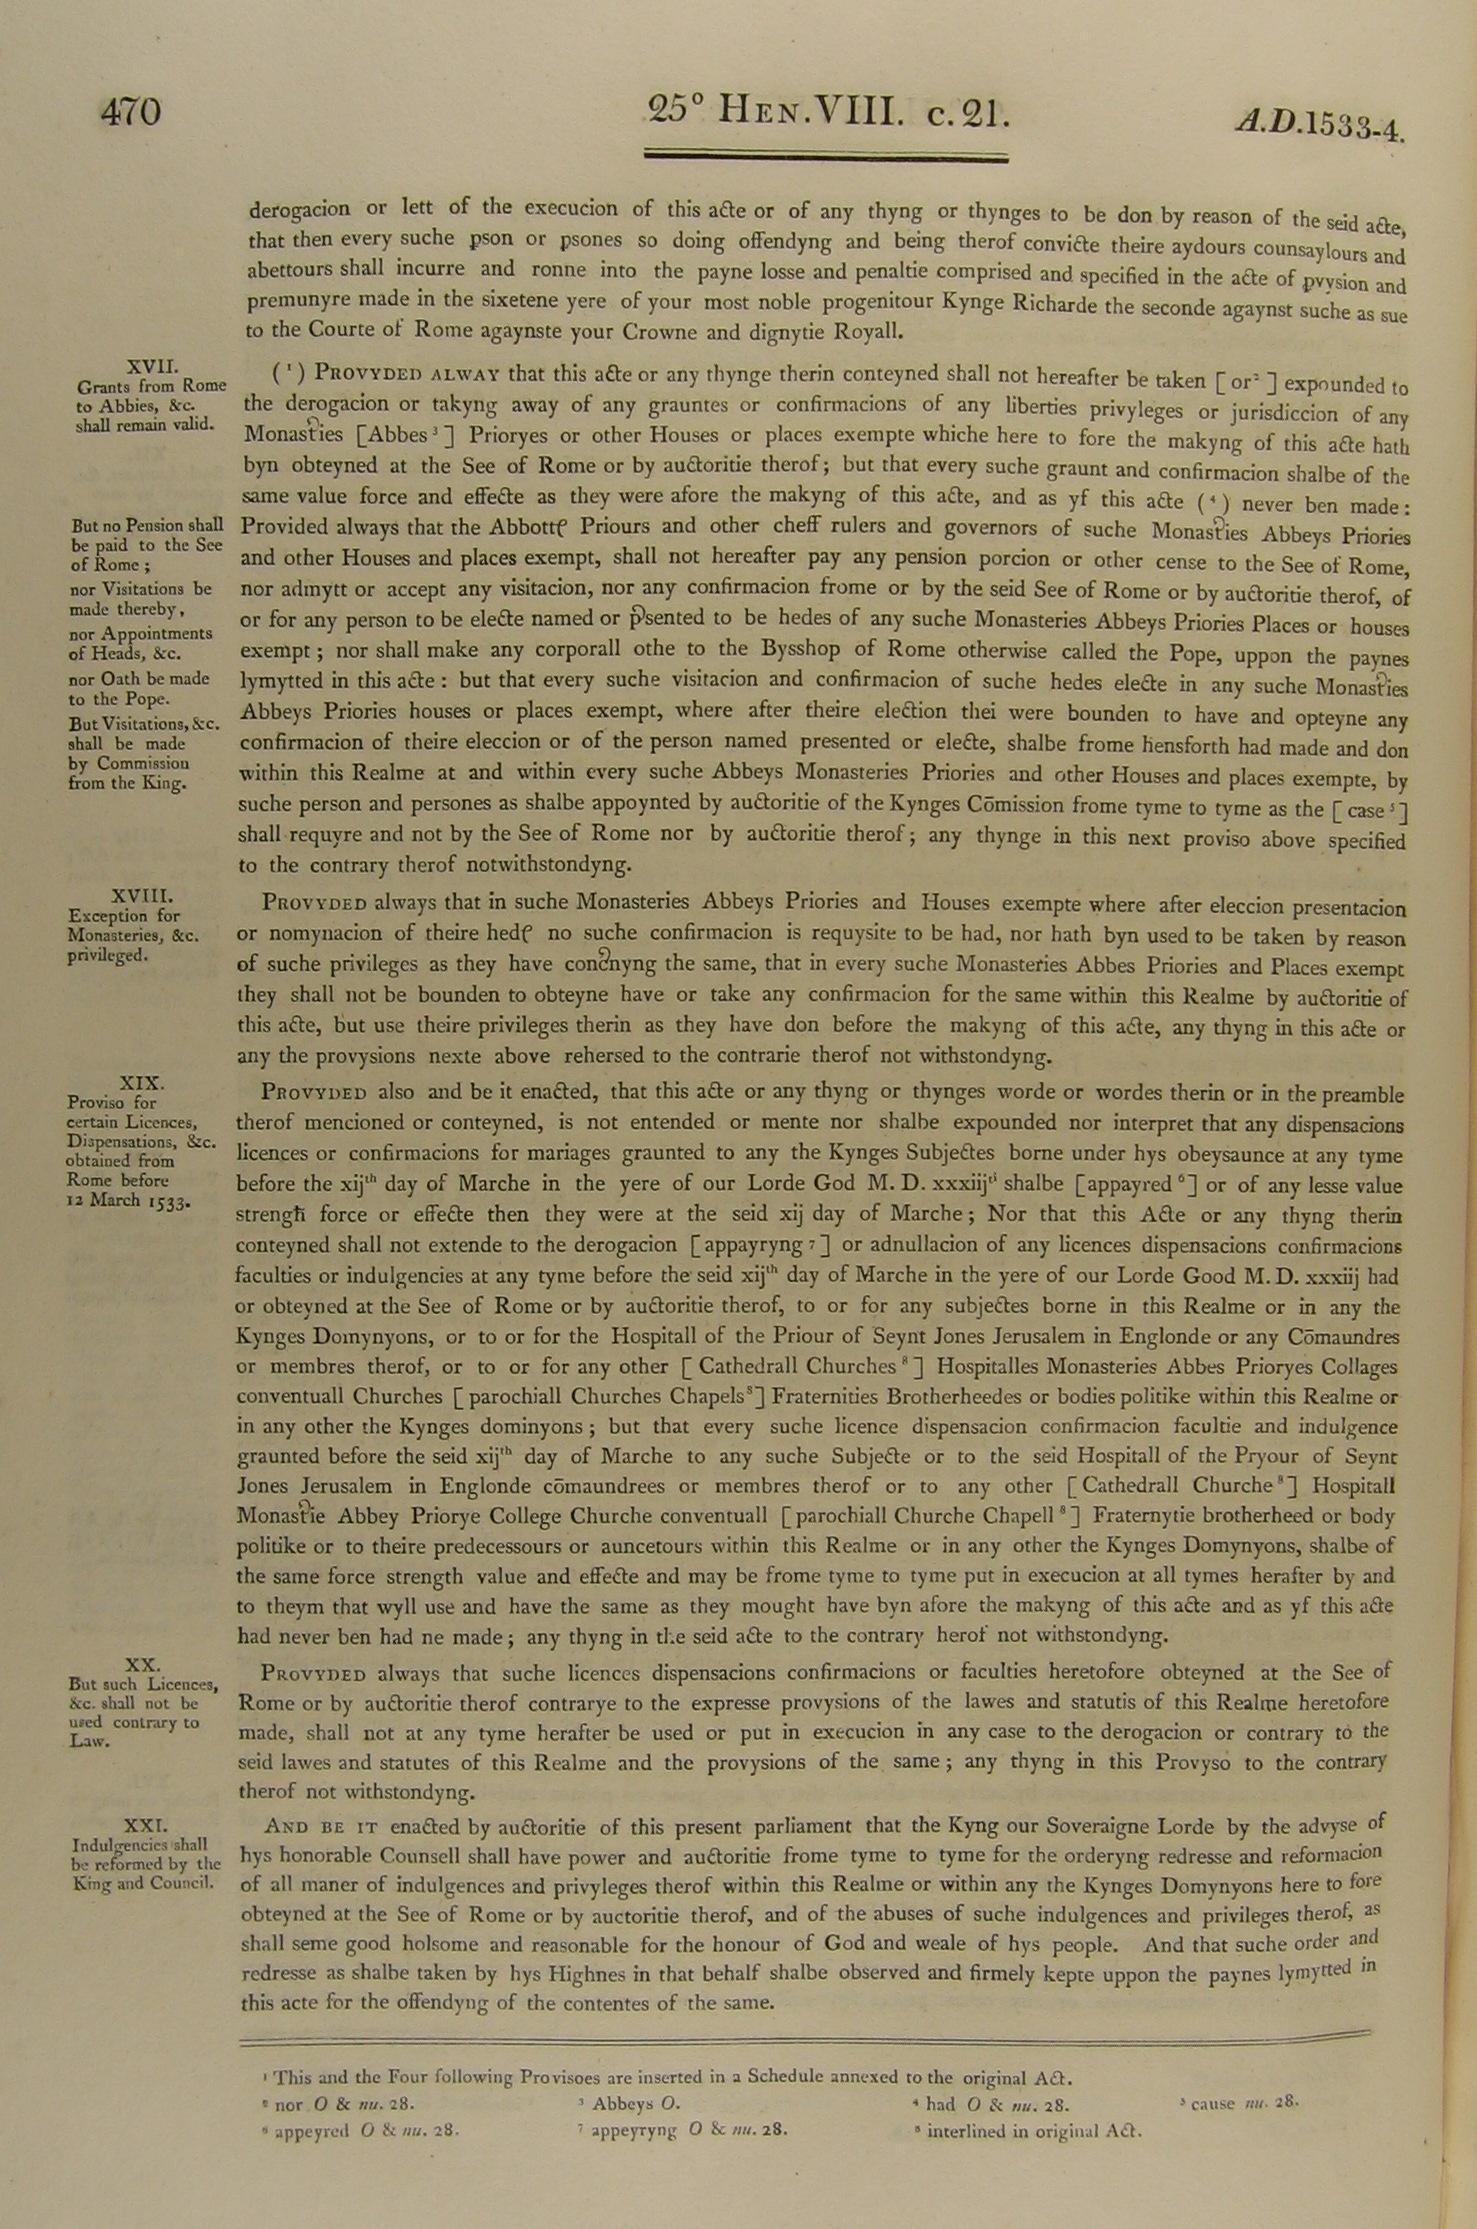 Image of 25 Henry VIII, c. 21 (page 7 of 8). Click for larger image.